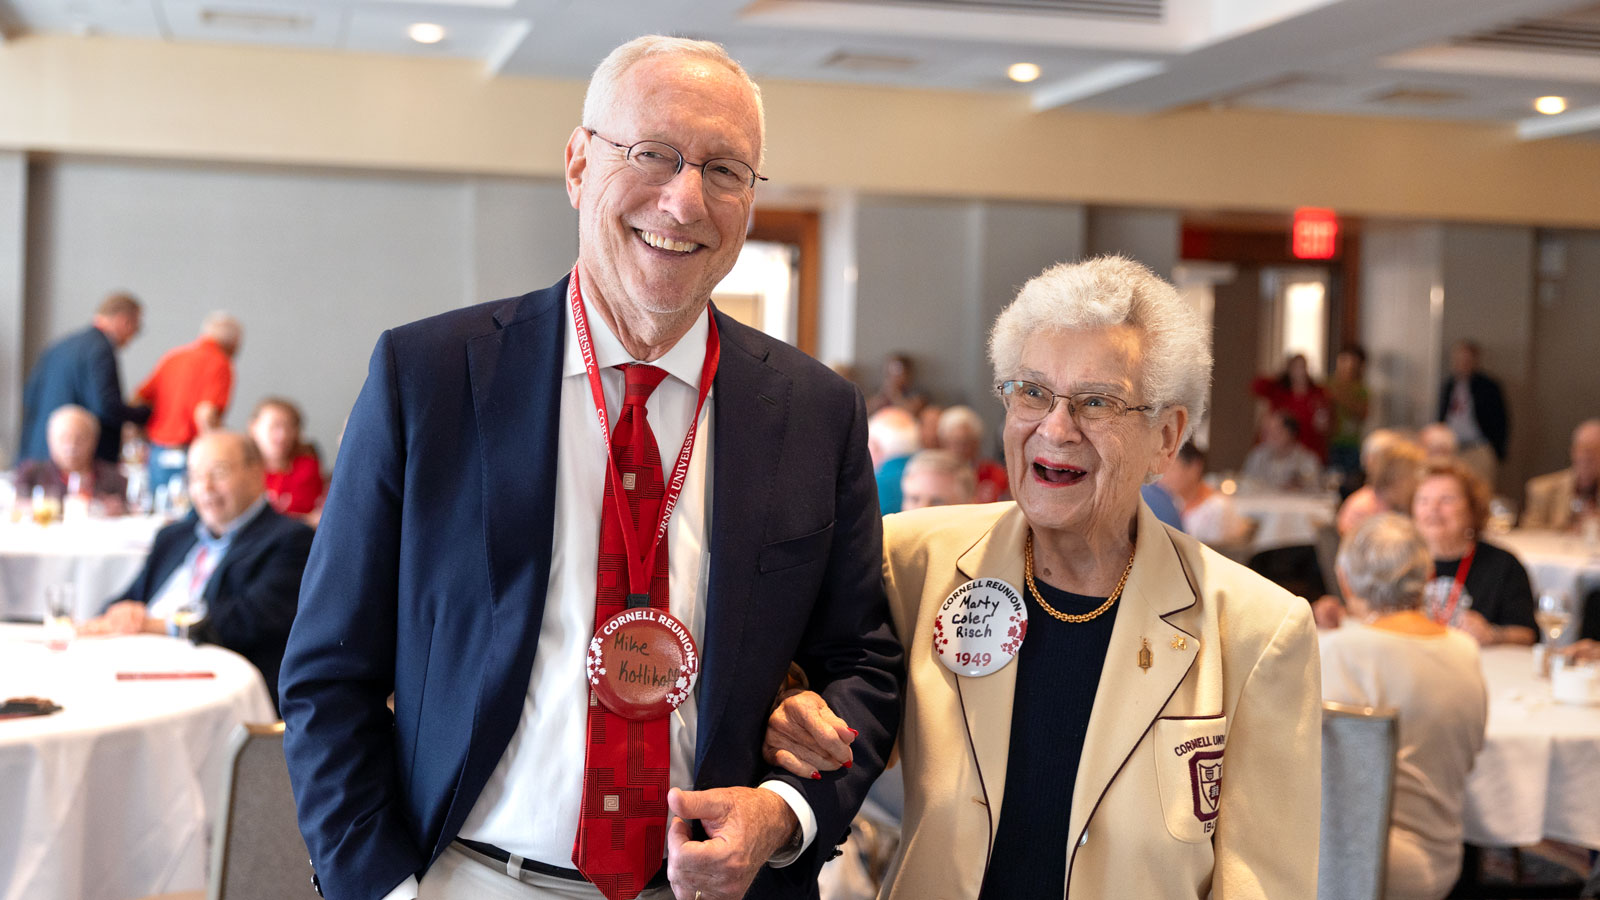 Interim president Mike Kotlikoff with Marty Coler Risch, Class of 1949, the oldest member of the class of 1949 and the guest of honor at the Spirit of 31 event during Reunion 2024